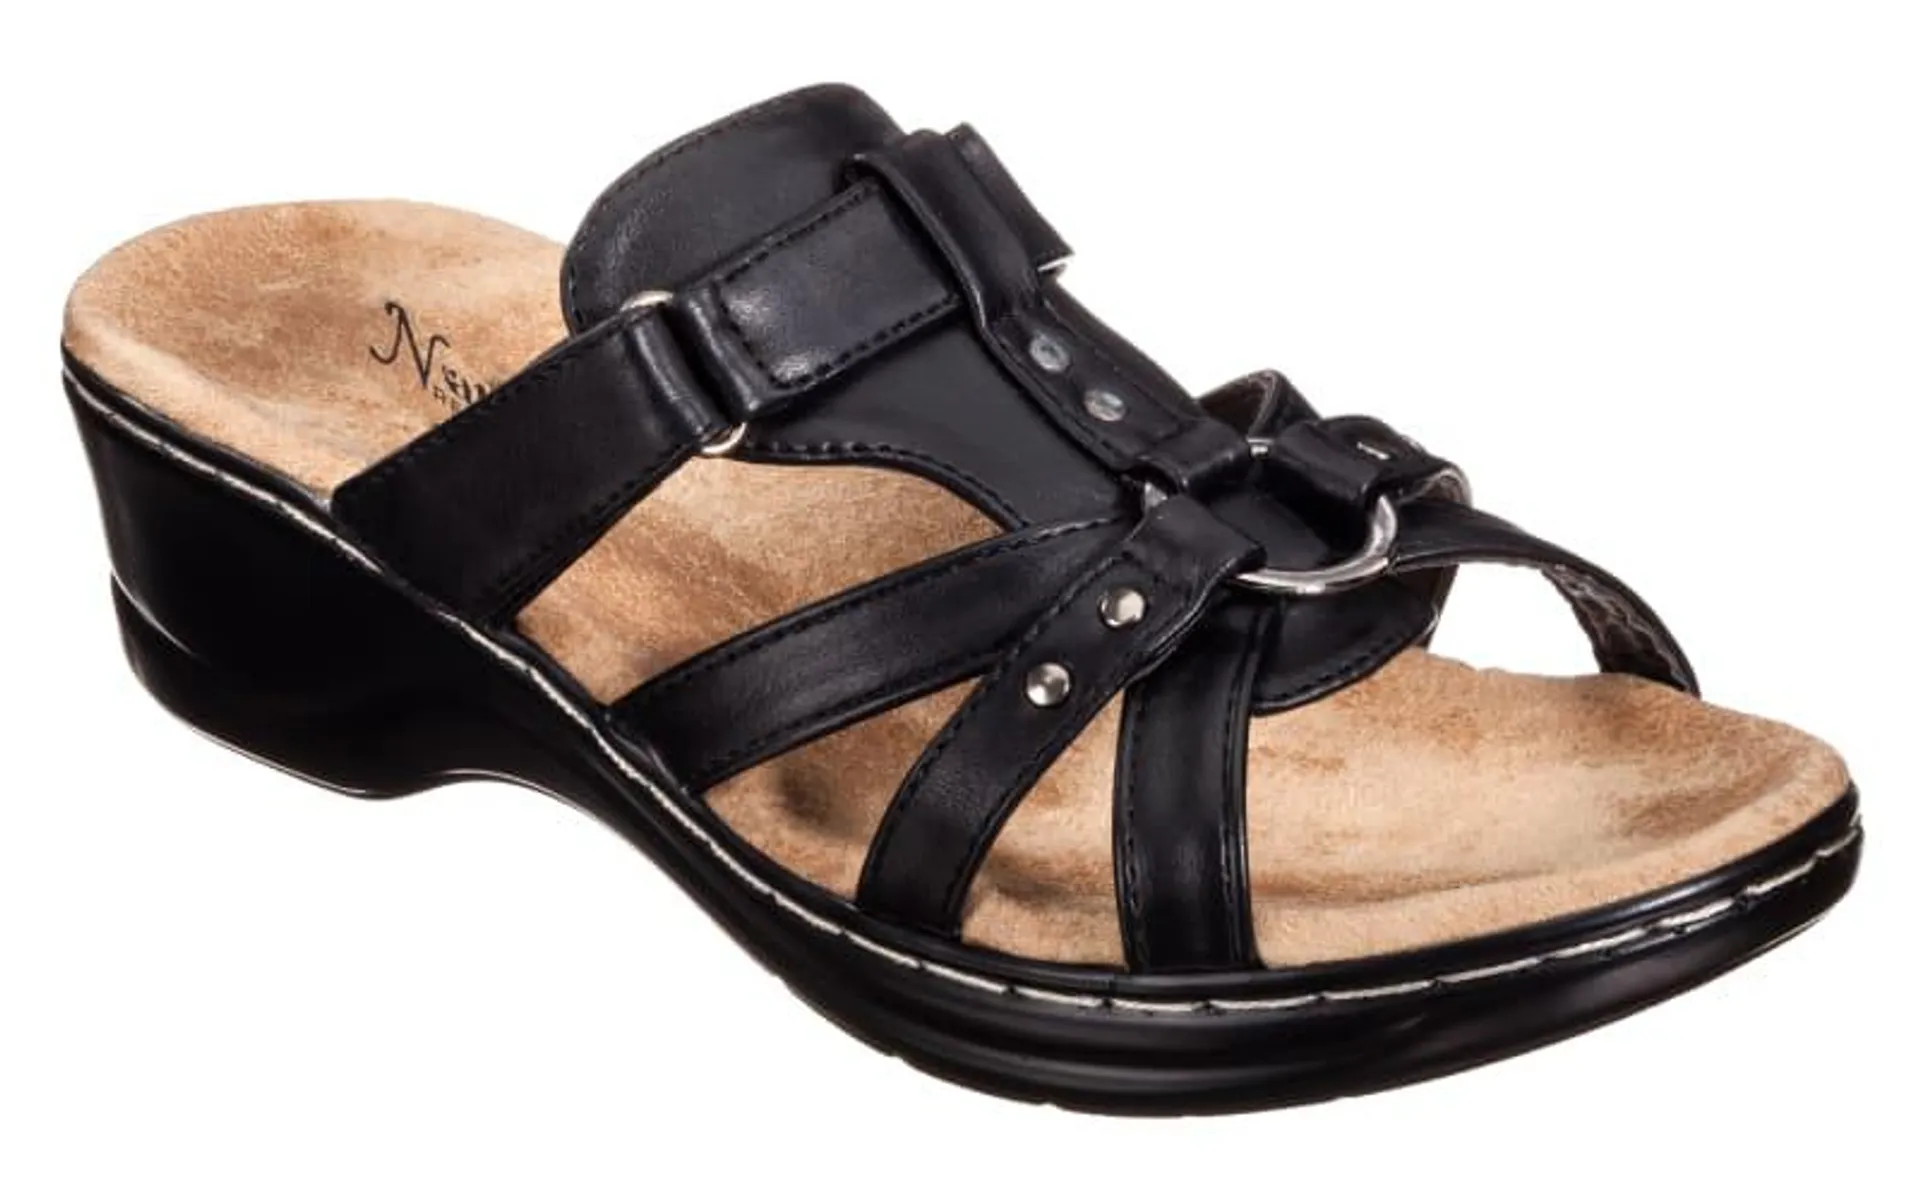 Natural Reflections Aleisha Wedge Sandals for Ladies - Black - 8M